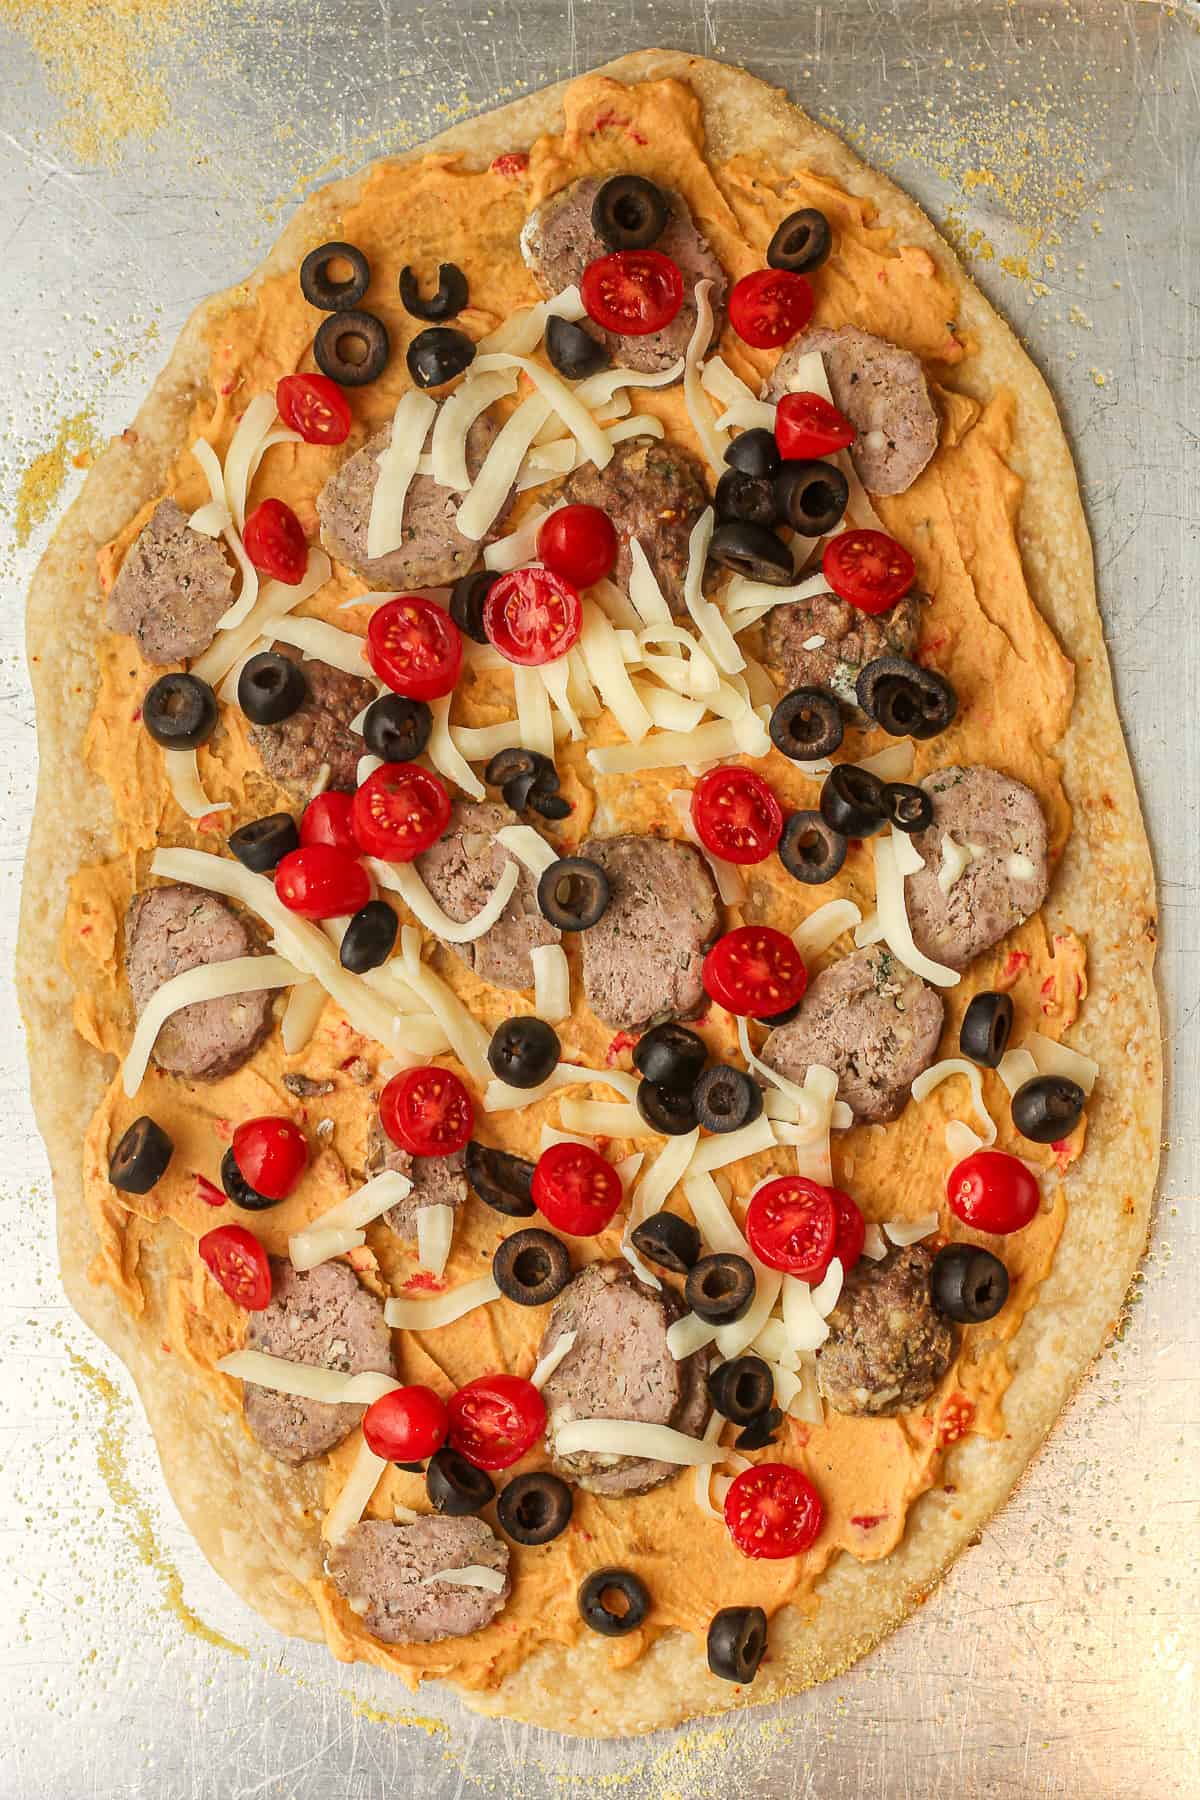 A pan of the flatbread pizza with hummus, lamb, olives, and tomatoes.